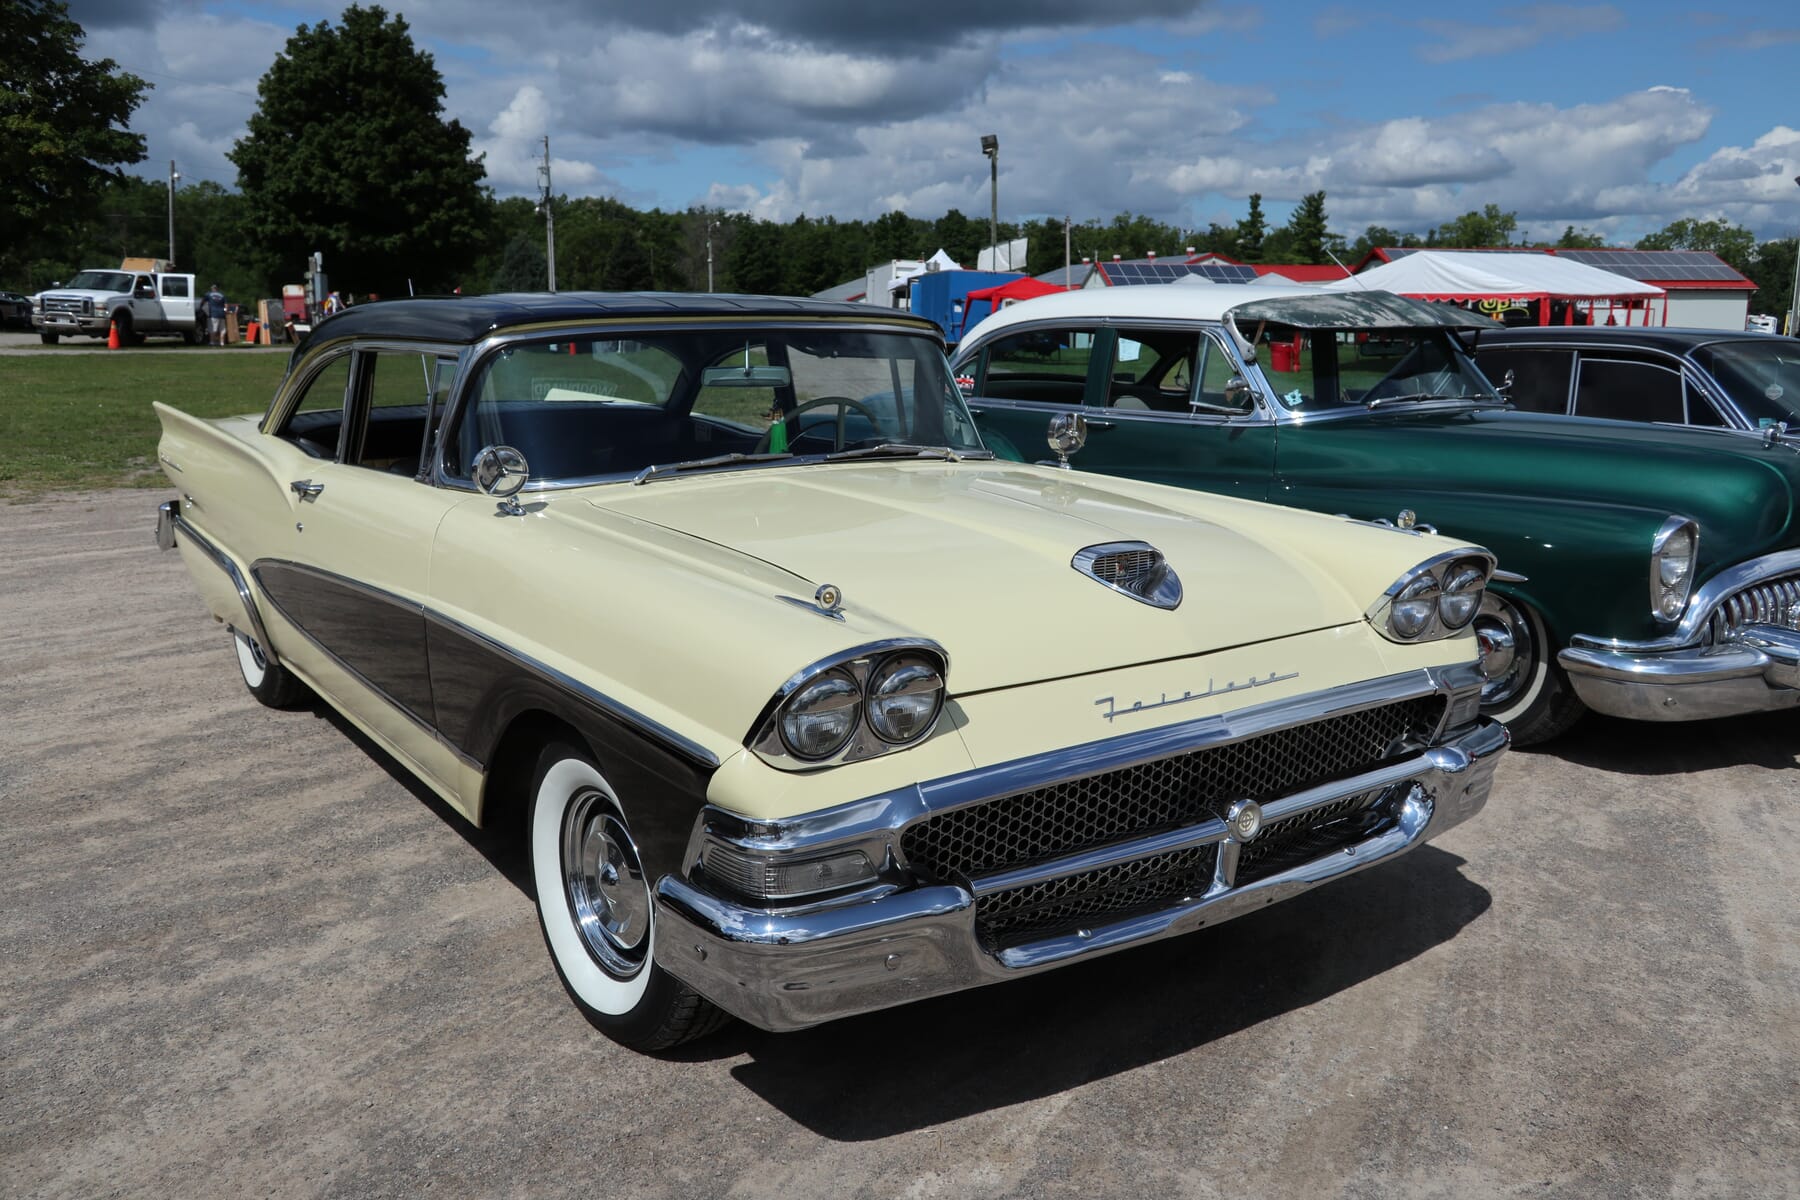 1958 Ford Fairlane with original paint combination and white wall tires